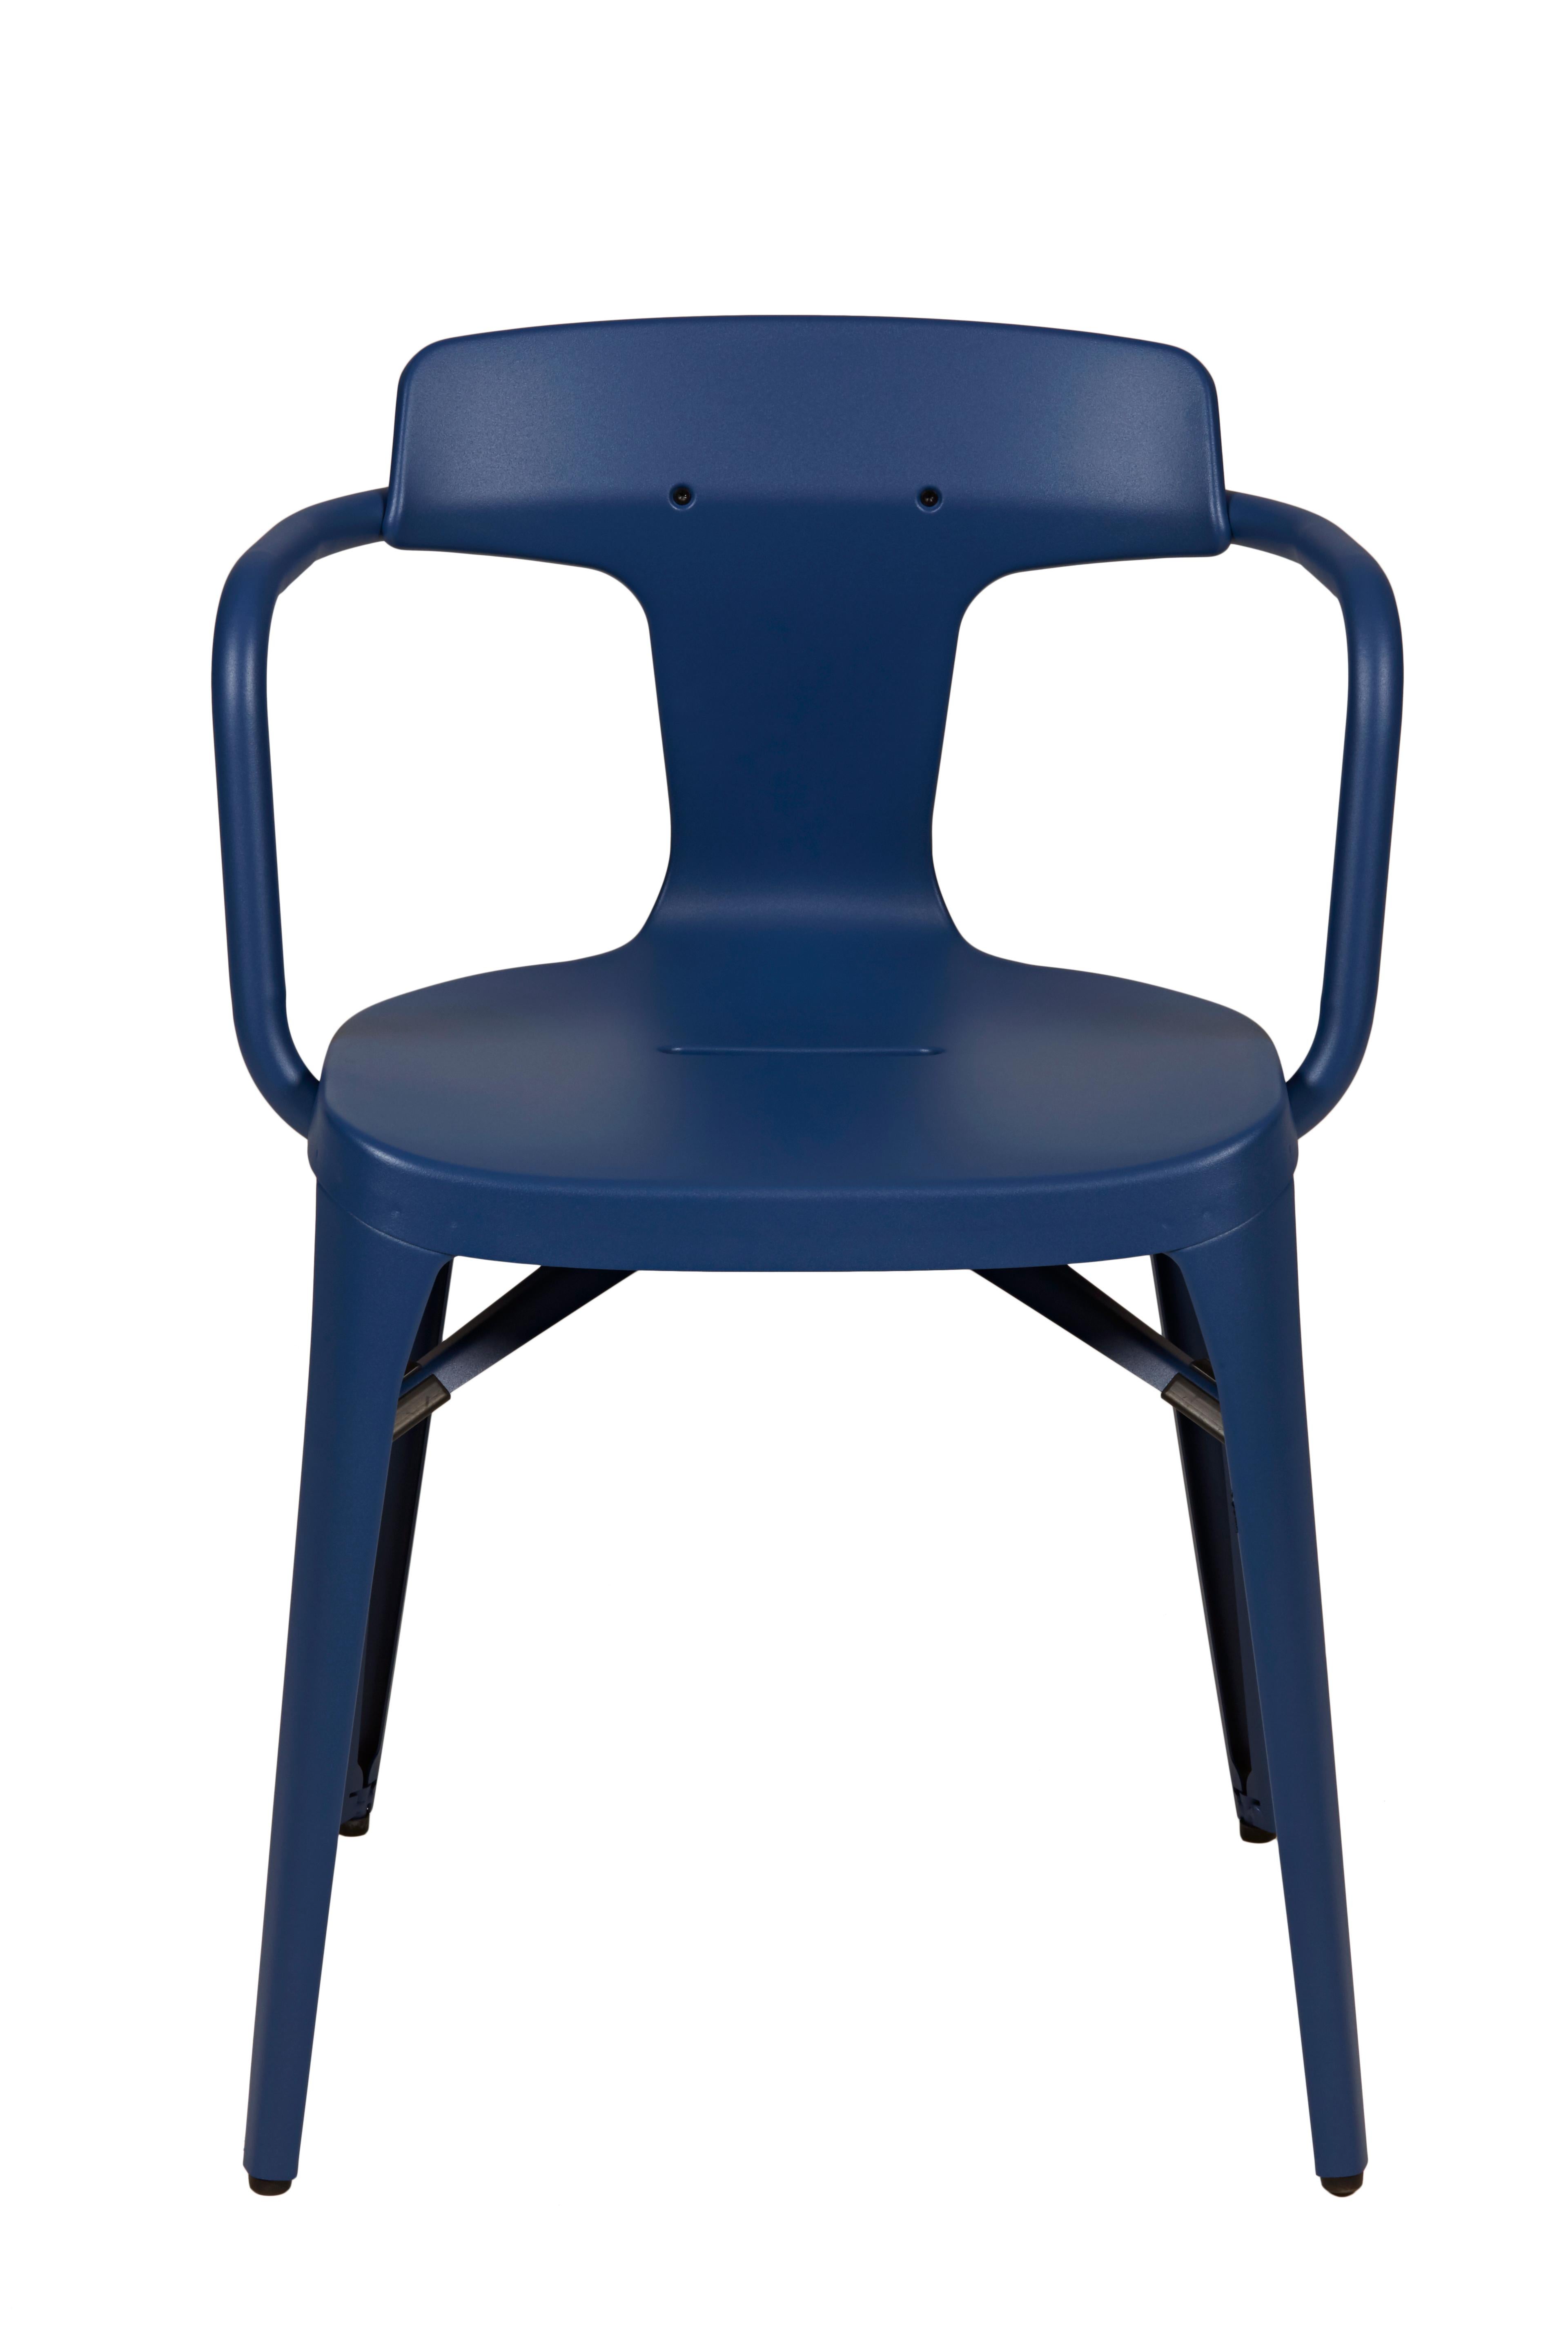 Im Angebot: T14 Chair in Pop Colors by Patrick Norguet and Tolix, Blue (Myrtille)